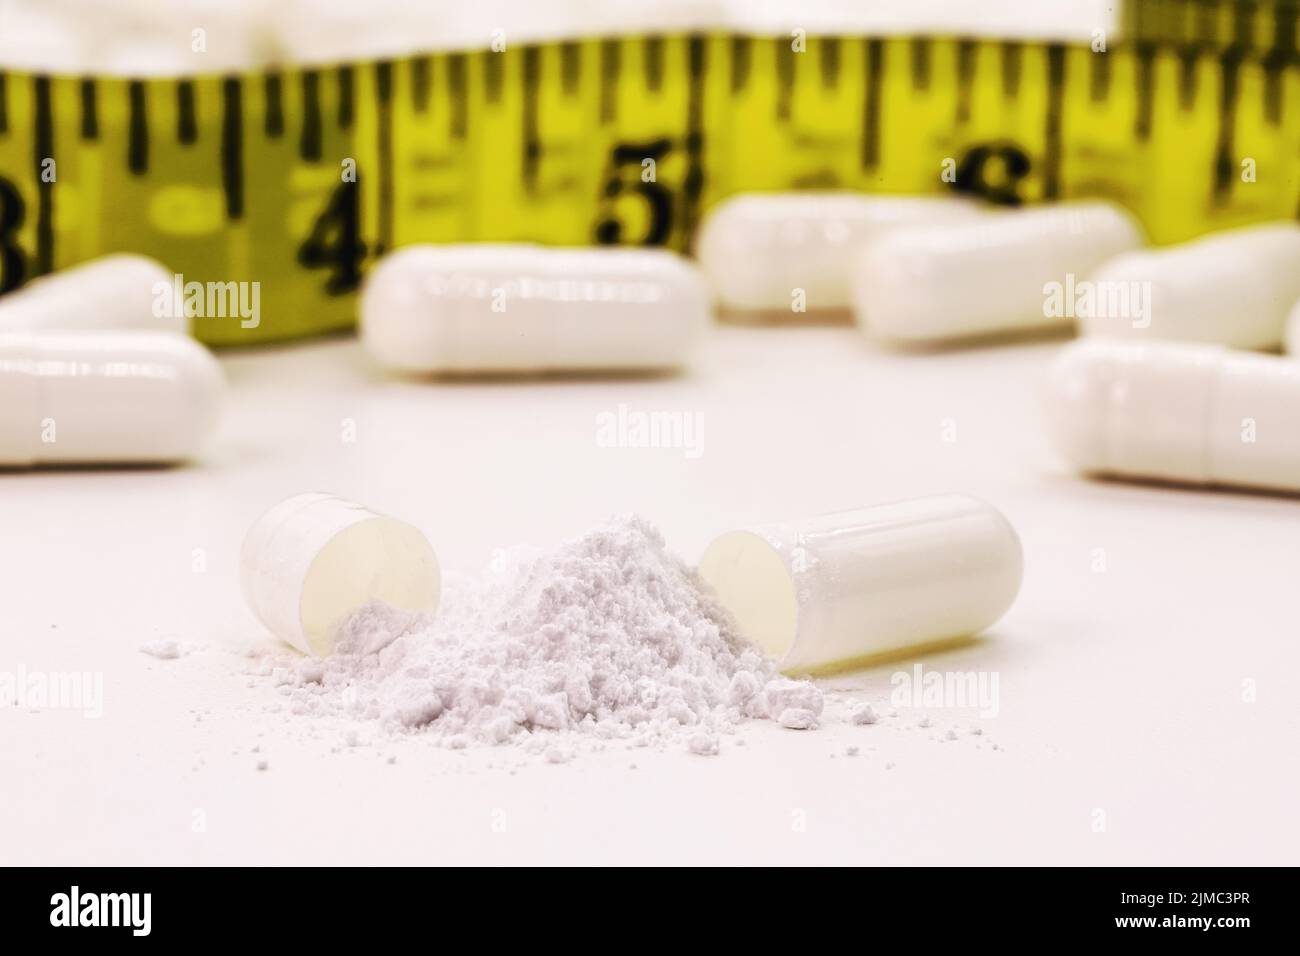 creatine pills, food supplement or energy vitamin for physical activity, with tape measure in the background Stock Photo